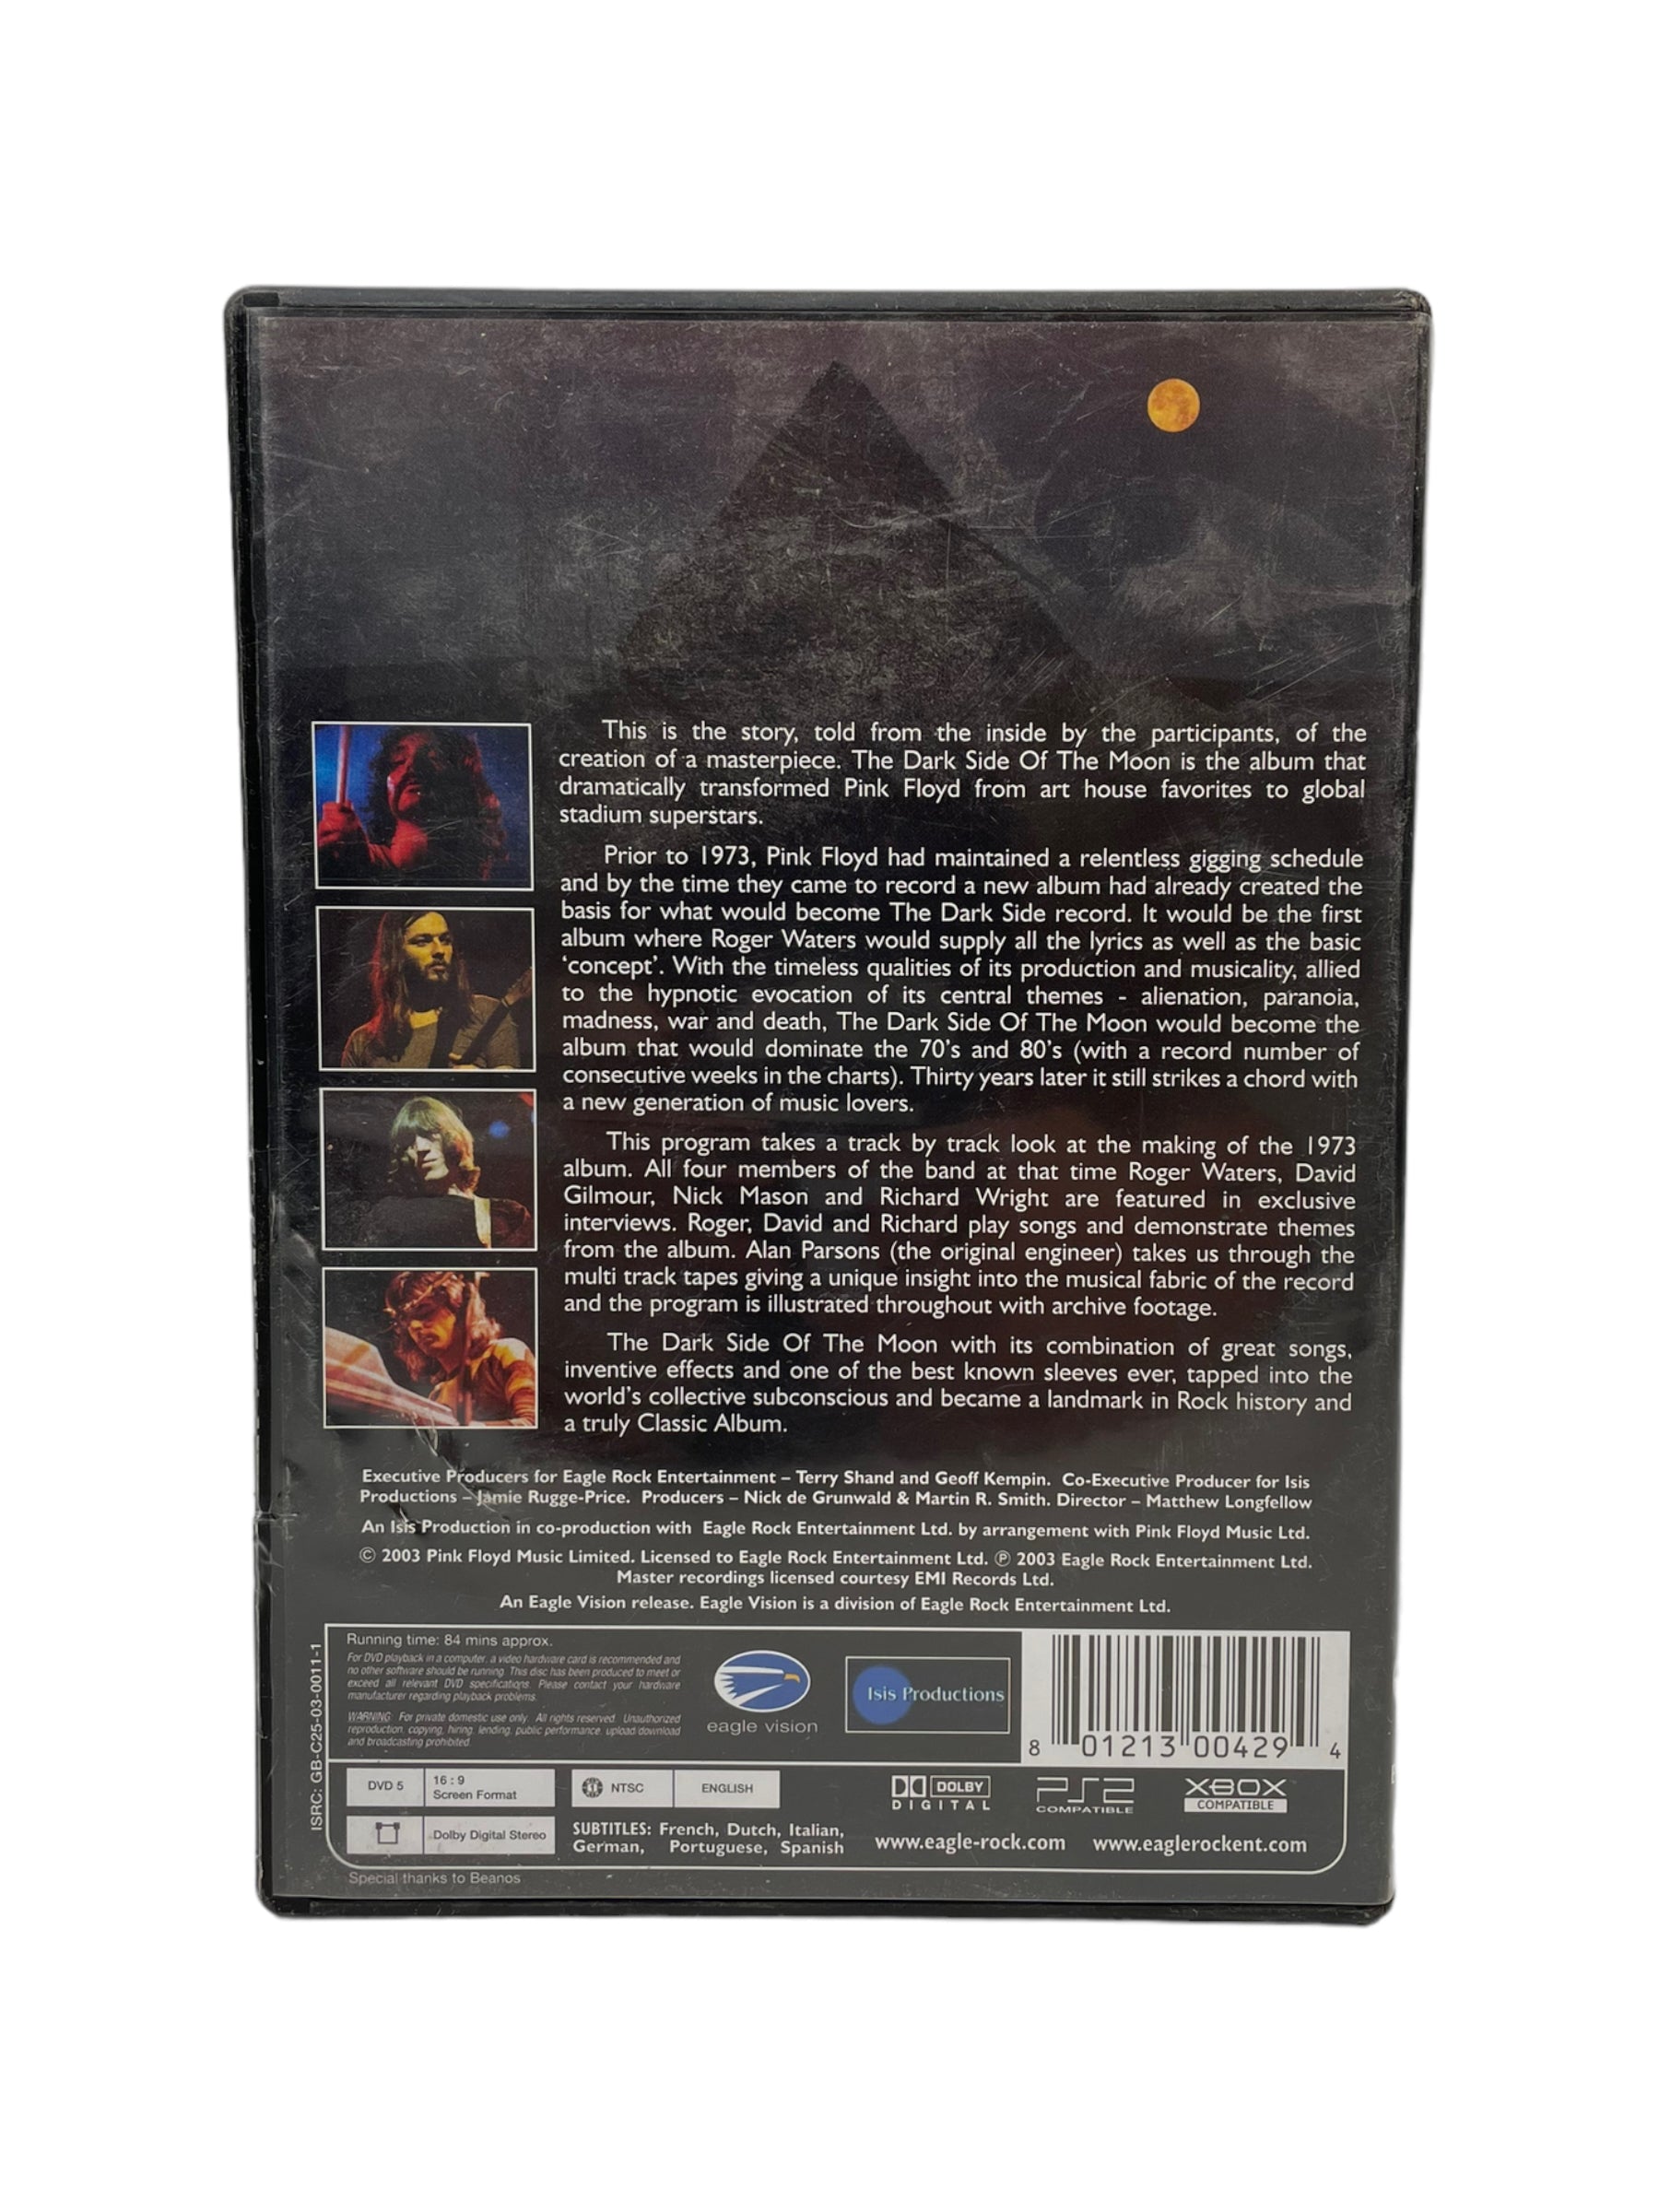 "The Making of Dark Side Of The Moon Classic Album" DVD